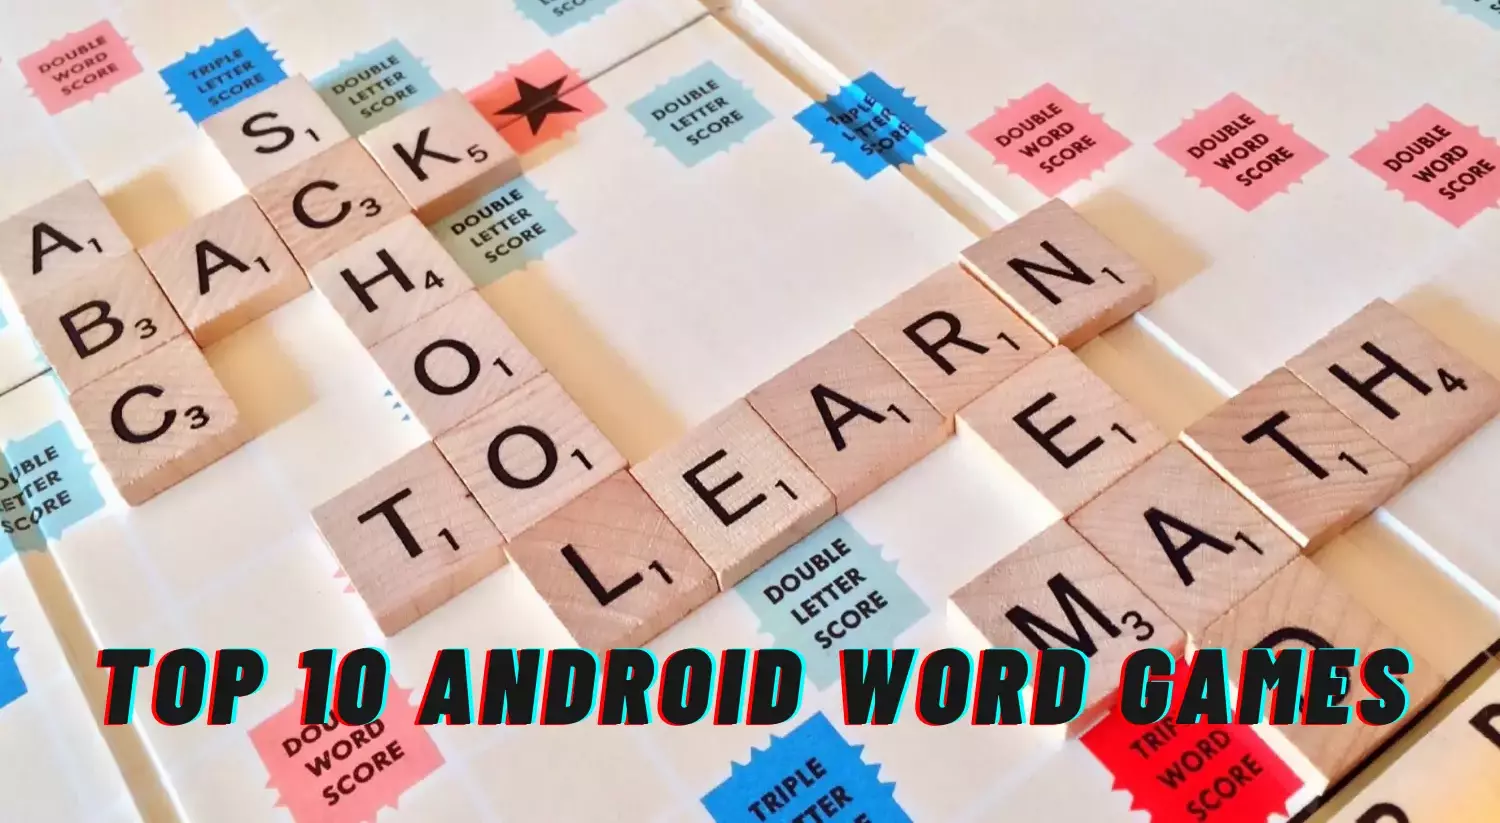 Top 10 Android Word Games